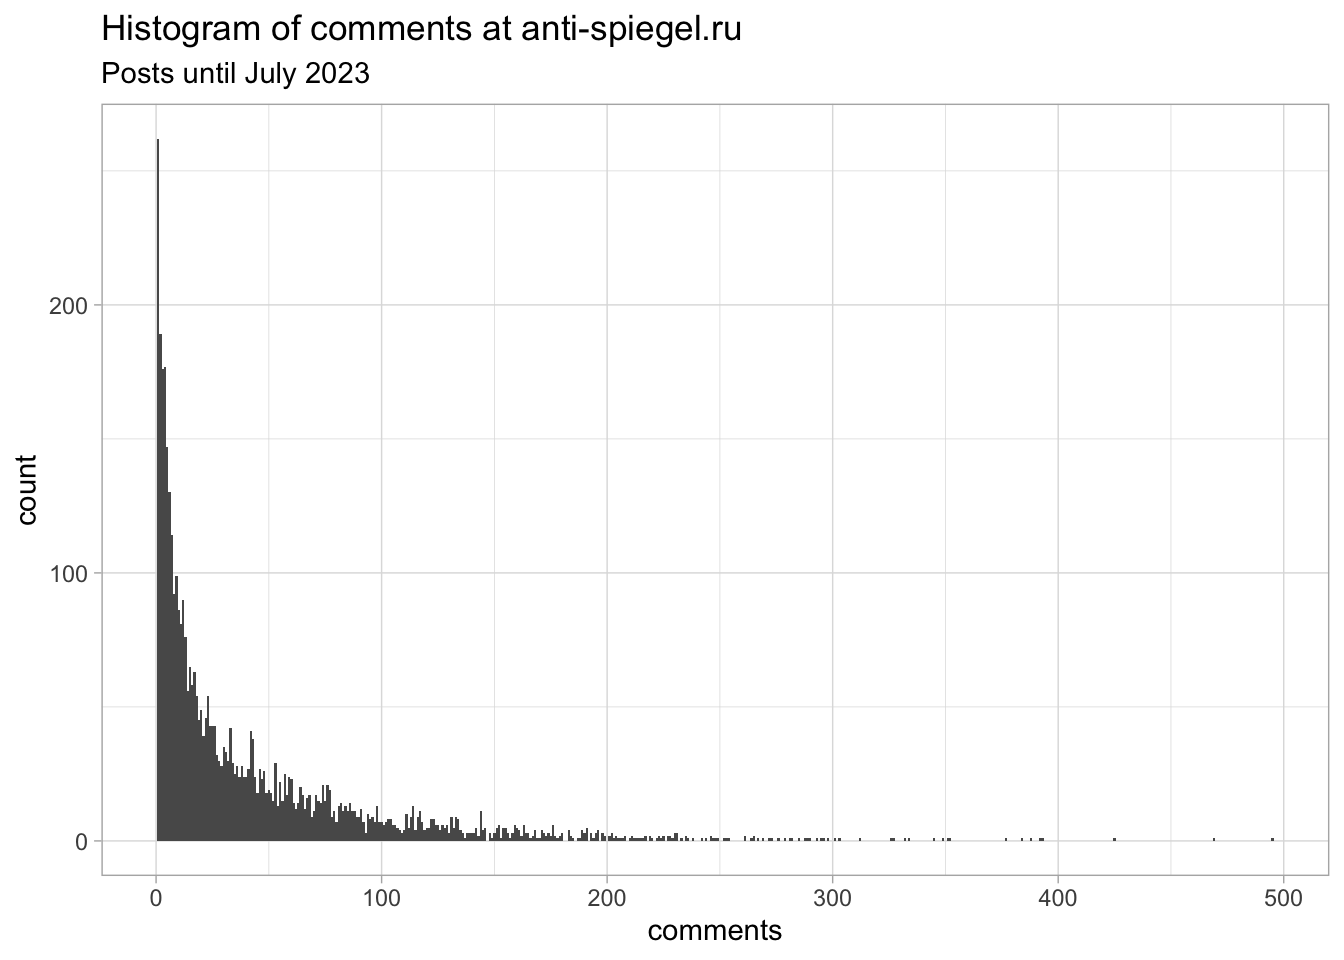 Histogram of number of comments under each article from anti-spiegel.ru